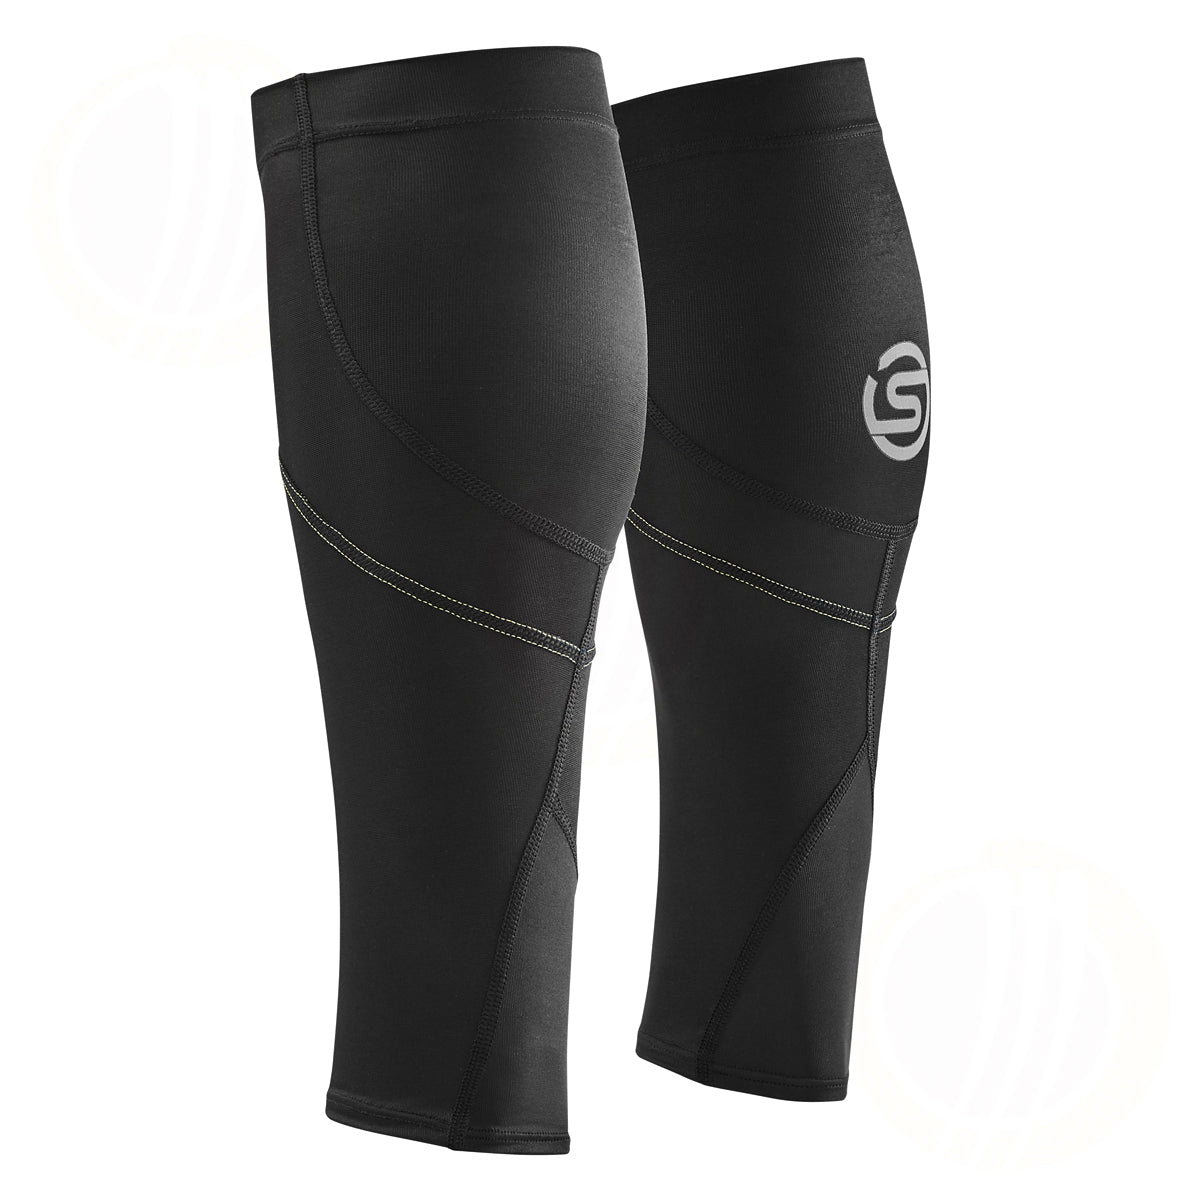 SKINS Compression Series-2 Men's Long Tights Charcoal Medium New with Tags